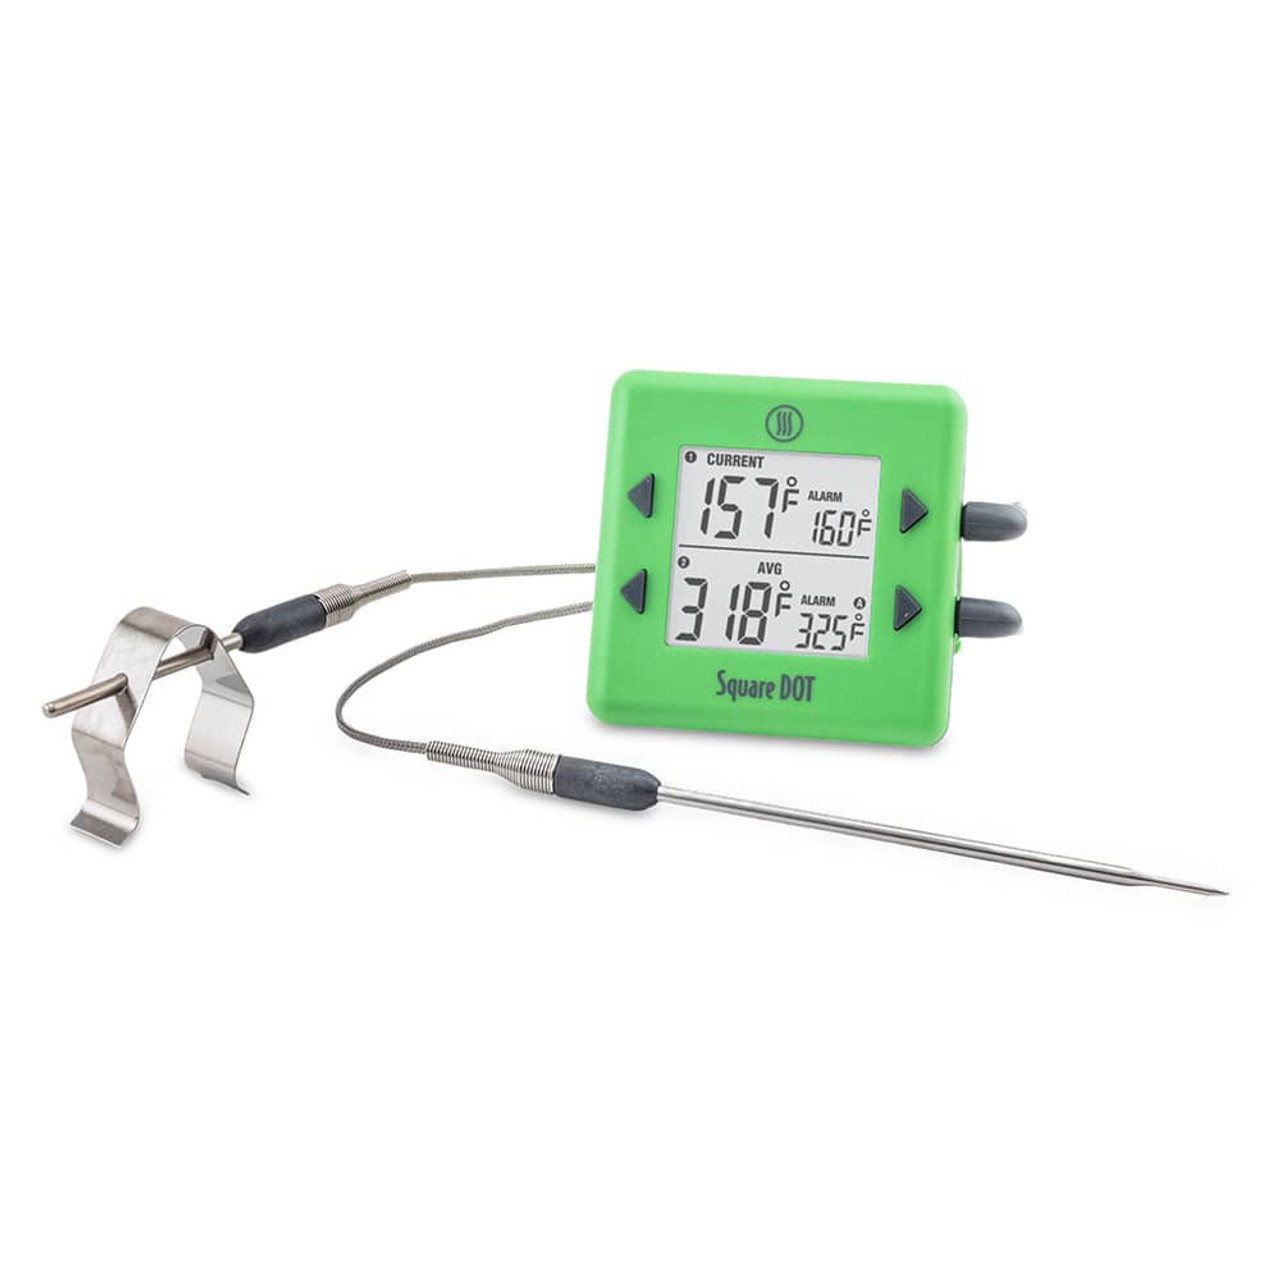 Square Dot Simple Alarm Thermometer | Green | Includes Pro-Series High Temp Straight Penetration Probe | ThermoWorks